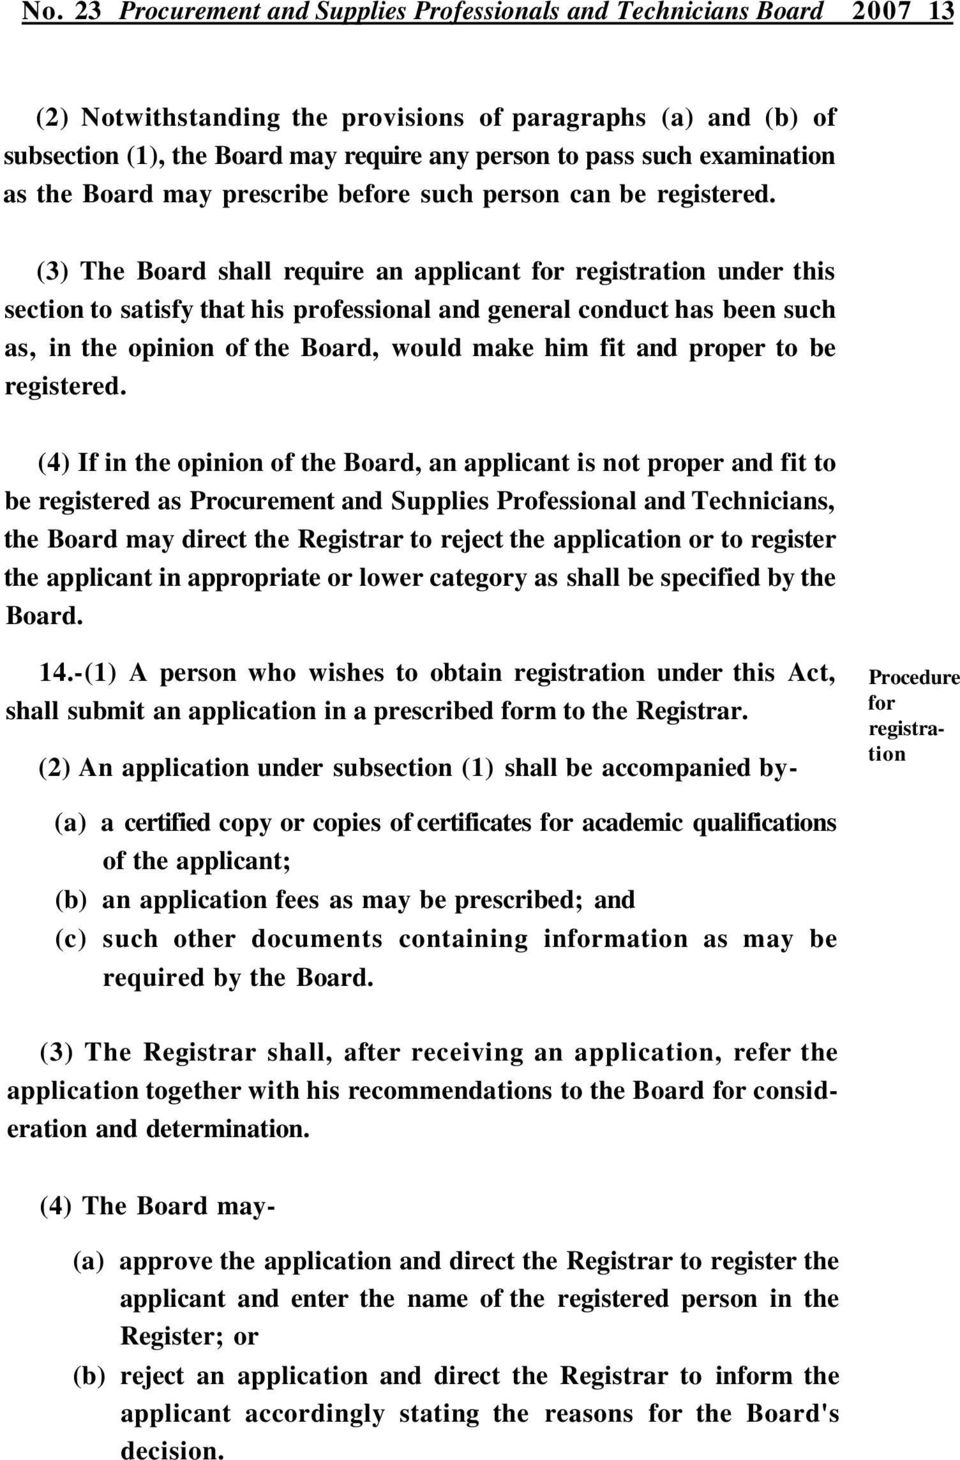 (3) The Board shall require an applicant for registration under this section to satisfy that his professional and general conduct has been such as, in the opinion of the Board, would make him fit and